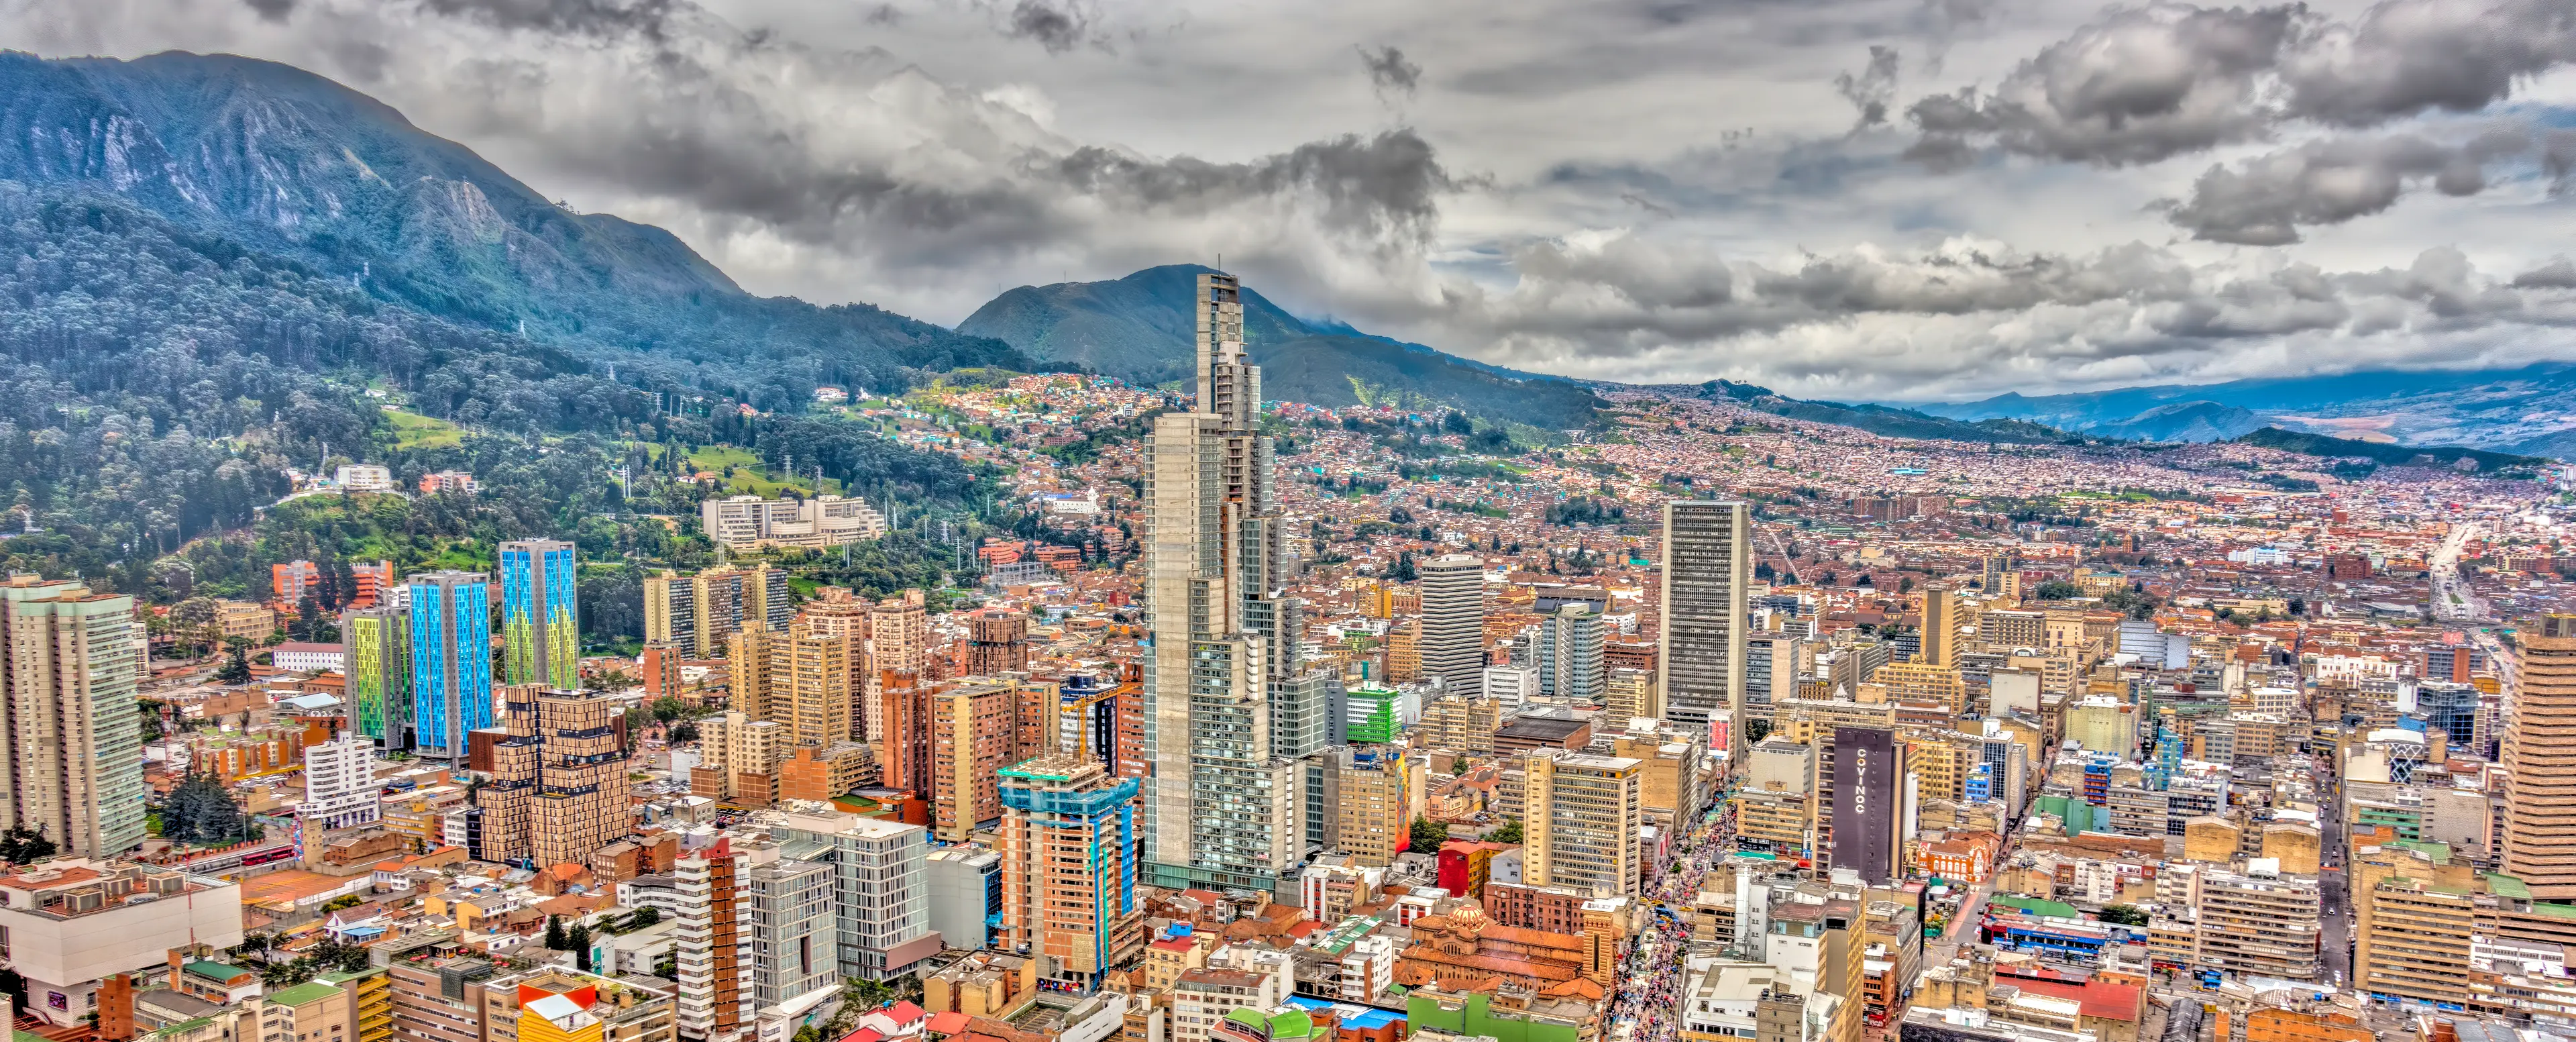 5-Day Offbeat Solo Adventure & Relaxation Itinerary in Bogota